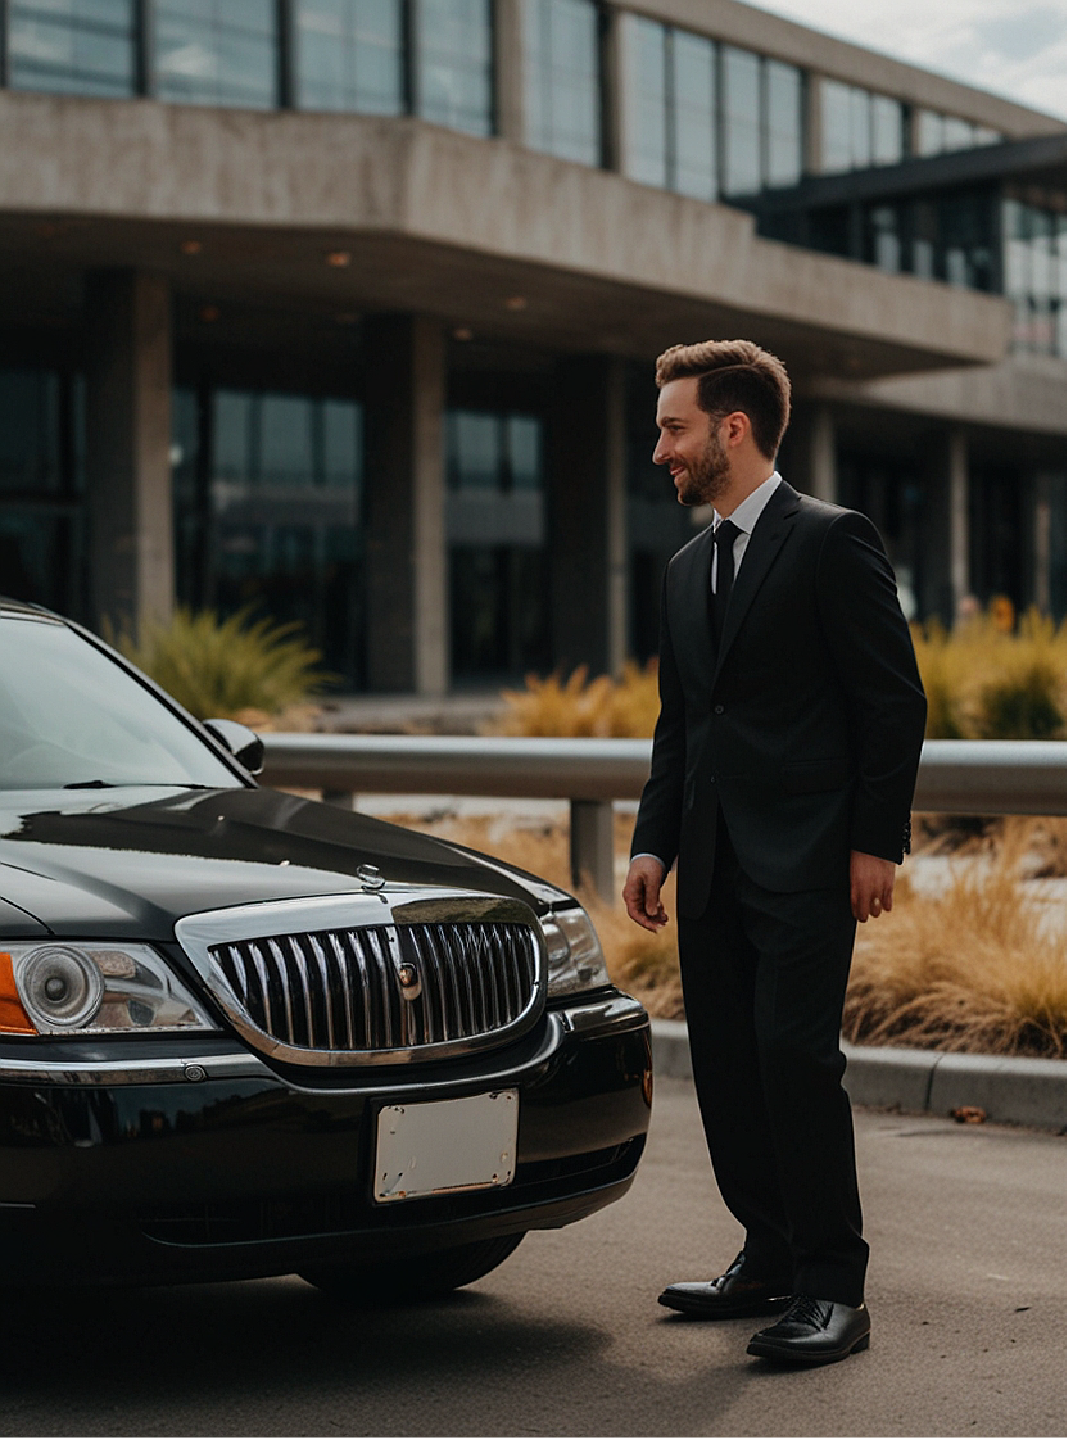 Why You Need a Limo Service for Your Next Business Trip